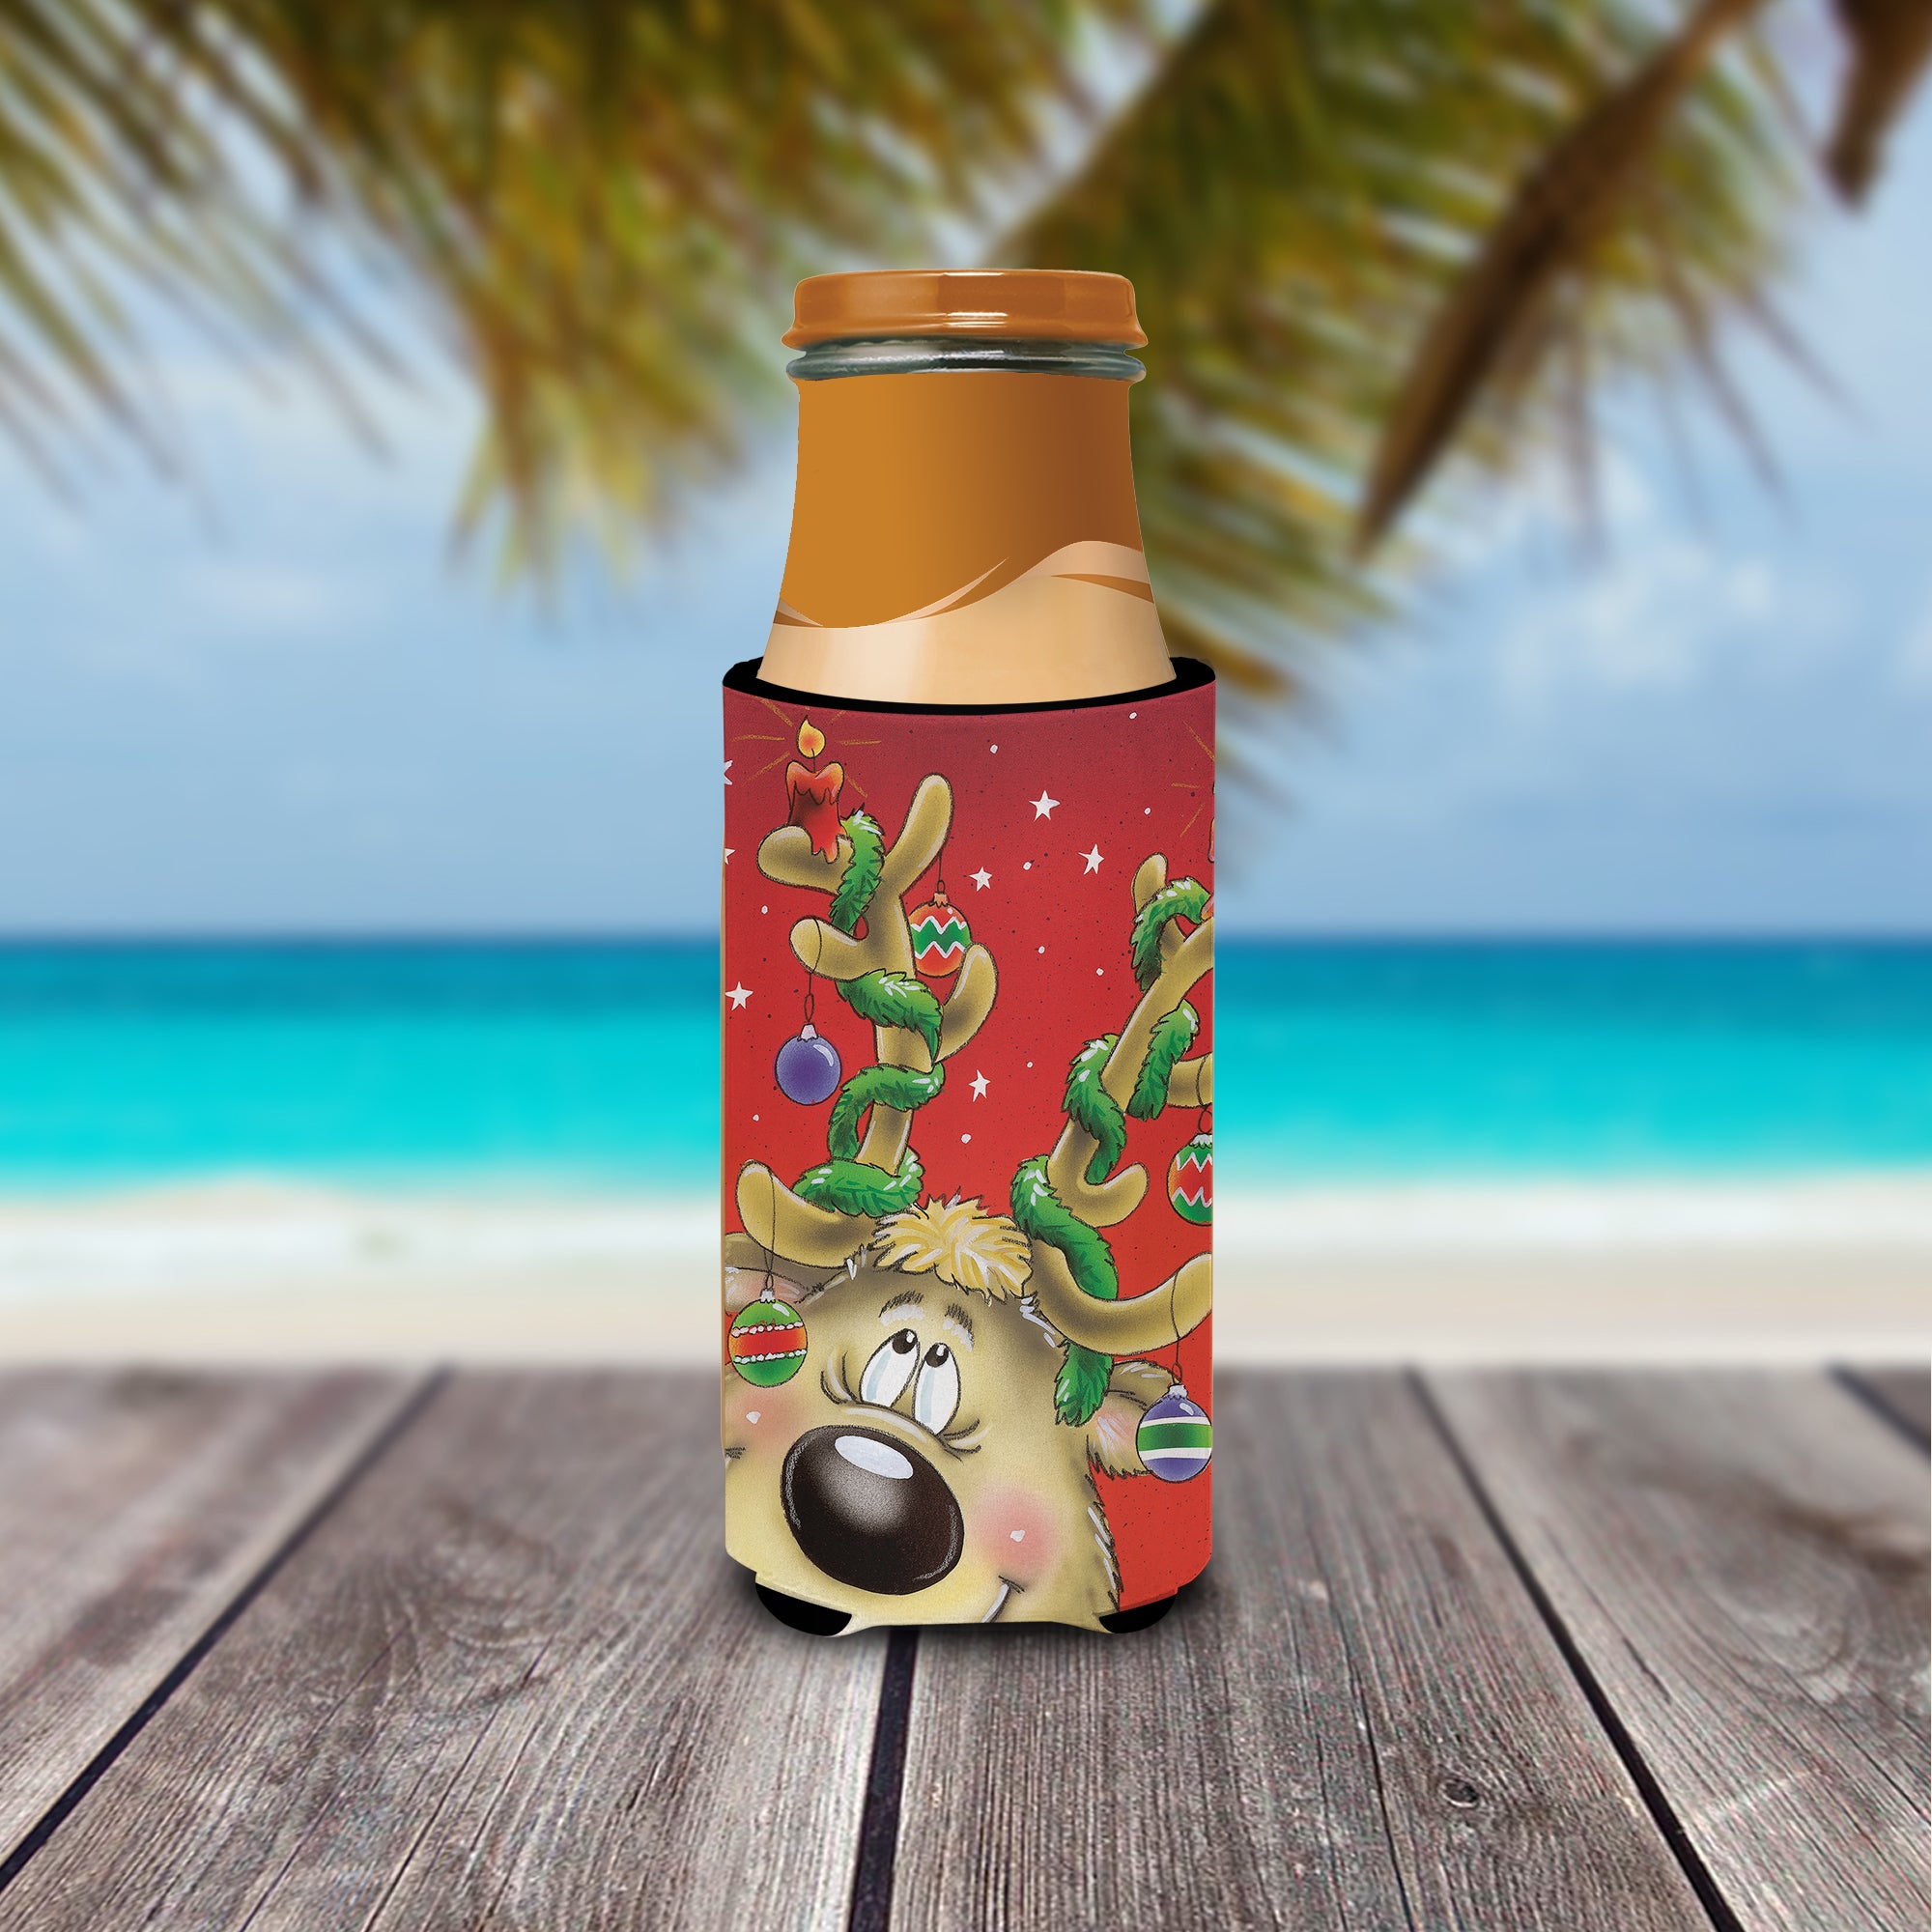 Comic Reindeer with Decorated Antlers Ultra Beverage Insulators for slim cans AAH7206MUK